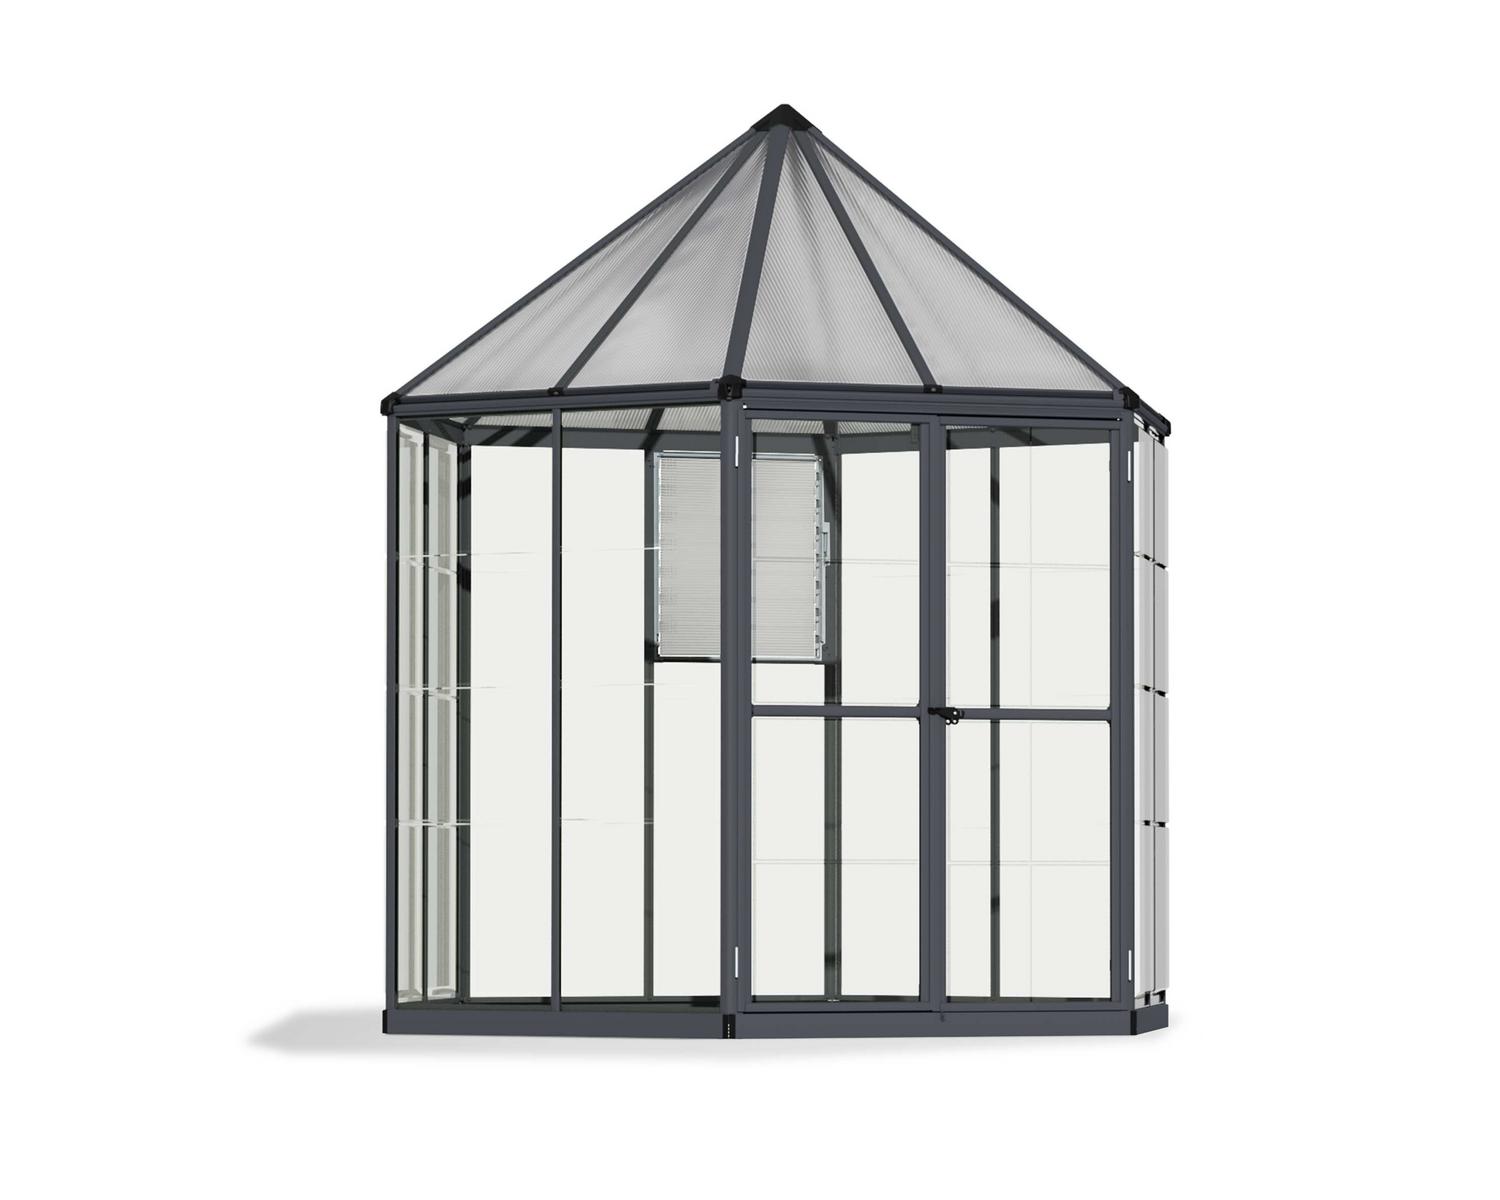 Greenhouses Oasis 8 Grey Structure & Hybrid Glazing